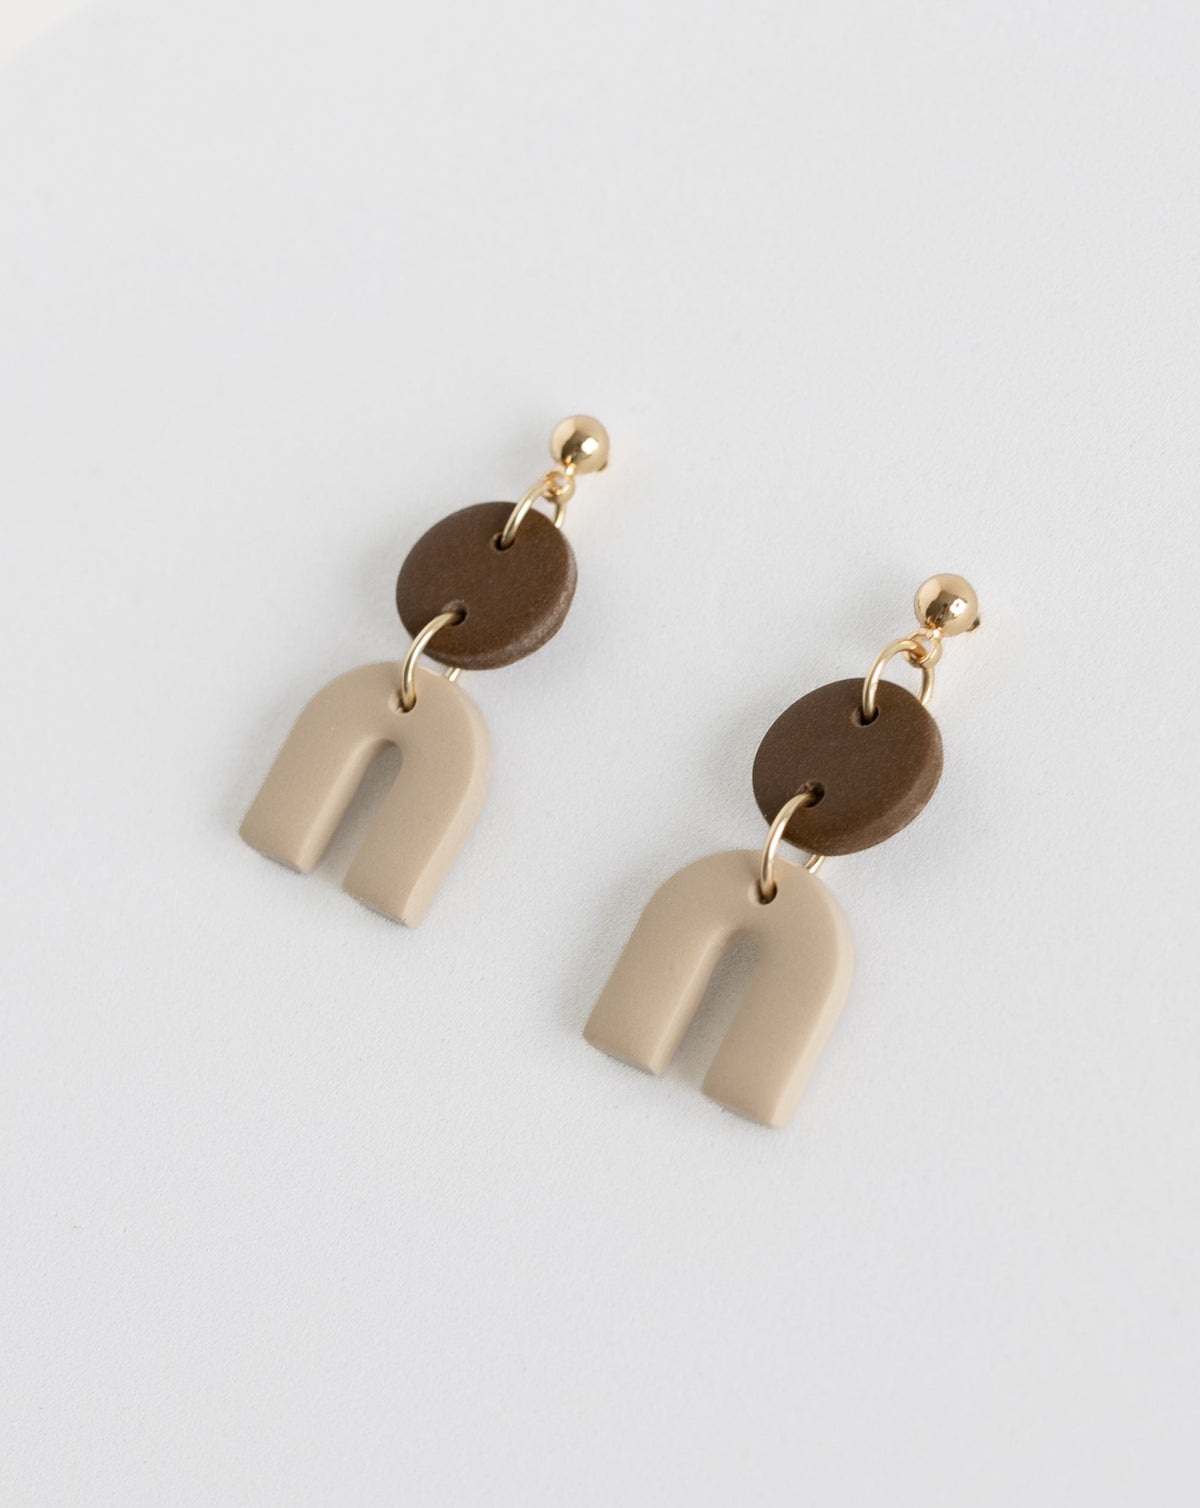 Tiny Arch earrings in two part of brown and beige clay parts with gold plated Ball studs, angled view.